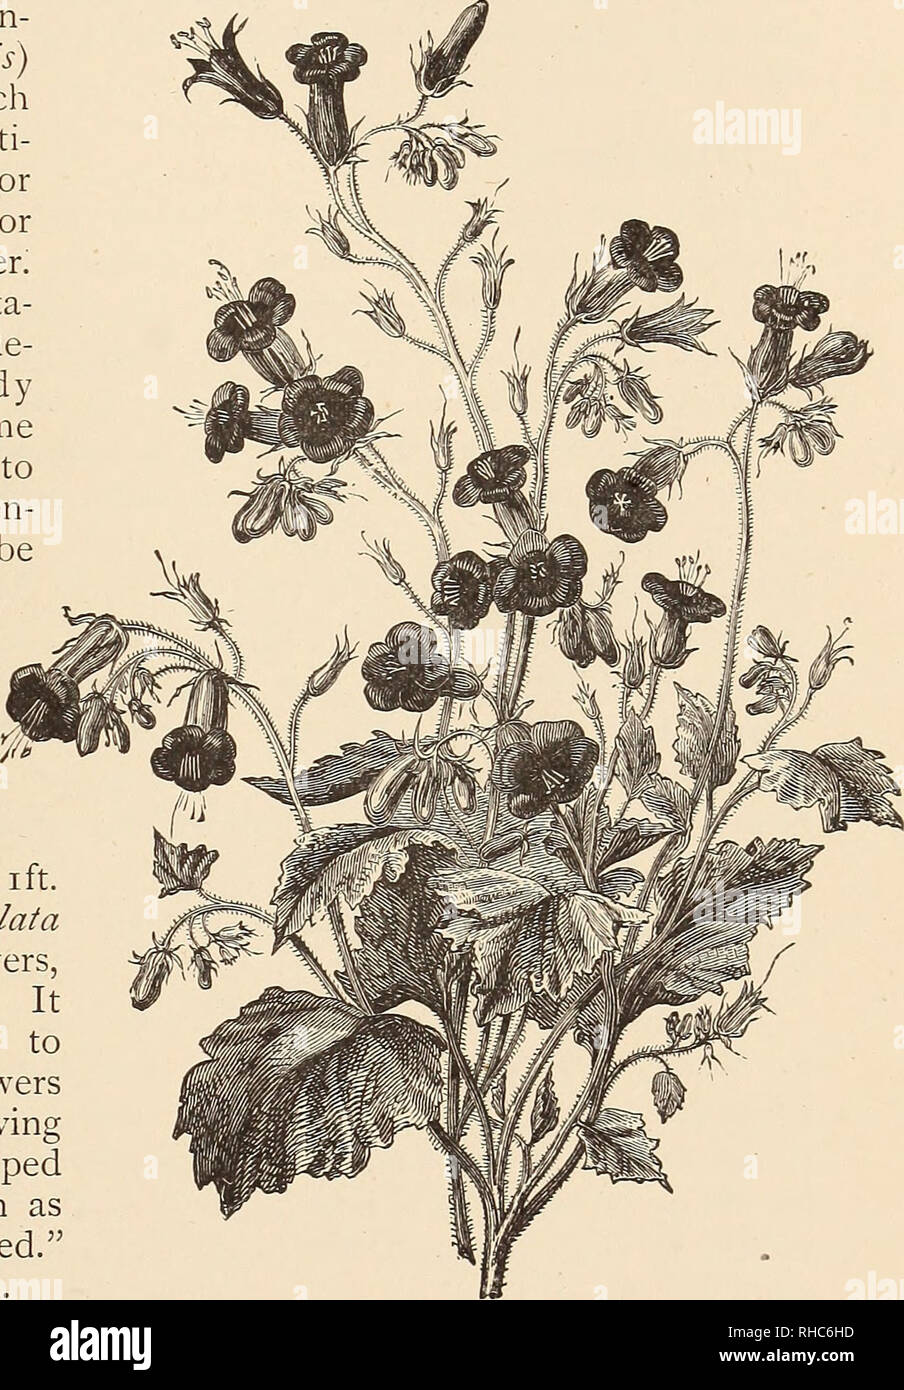 . The Book of gardening; a handbook of horticulture. Gardening; Floriculture. ON ANNUALS AND BIENNIALS. useful for the same purpose, the plants being literally covered ^vith flowers in the sprino- Virginian Stocks.—Malcolmia maritima flowering annual^ easy of culture in any If sown in April, it will flower in June, sowings it may be had in flower from then until September. It grows from 6in. to i2in. high, and has lilac, rose, red, and white flowers. is a well-known free- ordinary garden soil, and by successional ViscARiA (now in- cluded under Lychnis) is a genus which yields several beauti- f Stock Photo